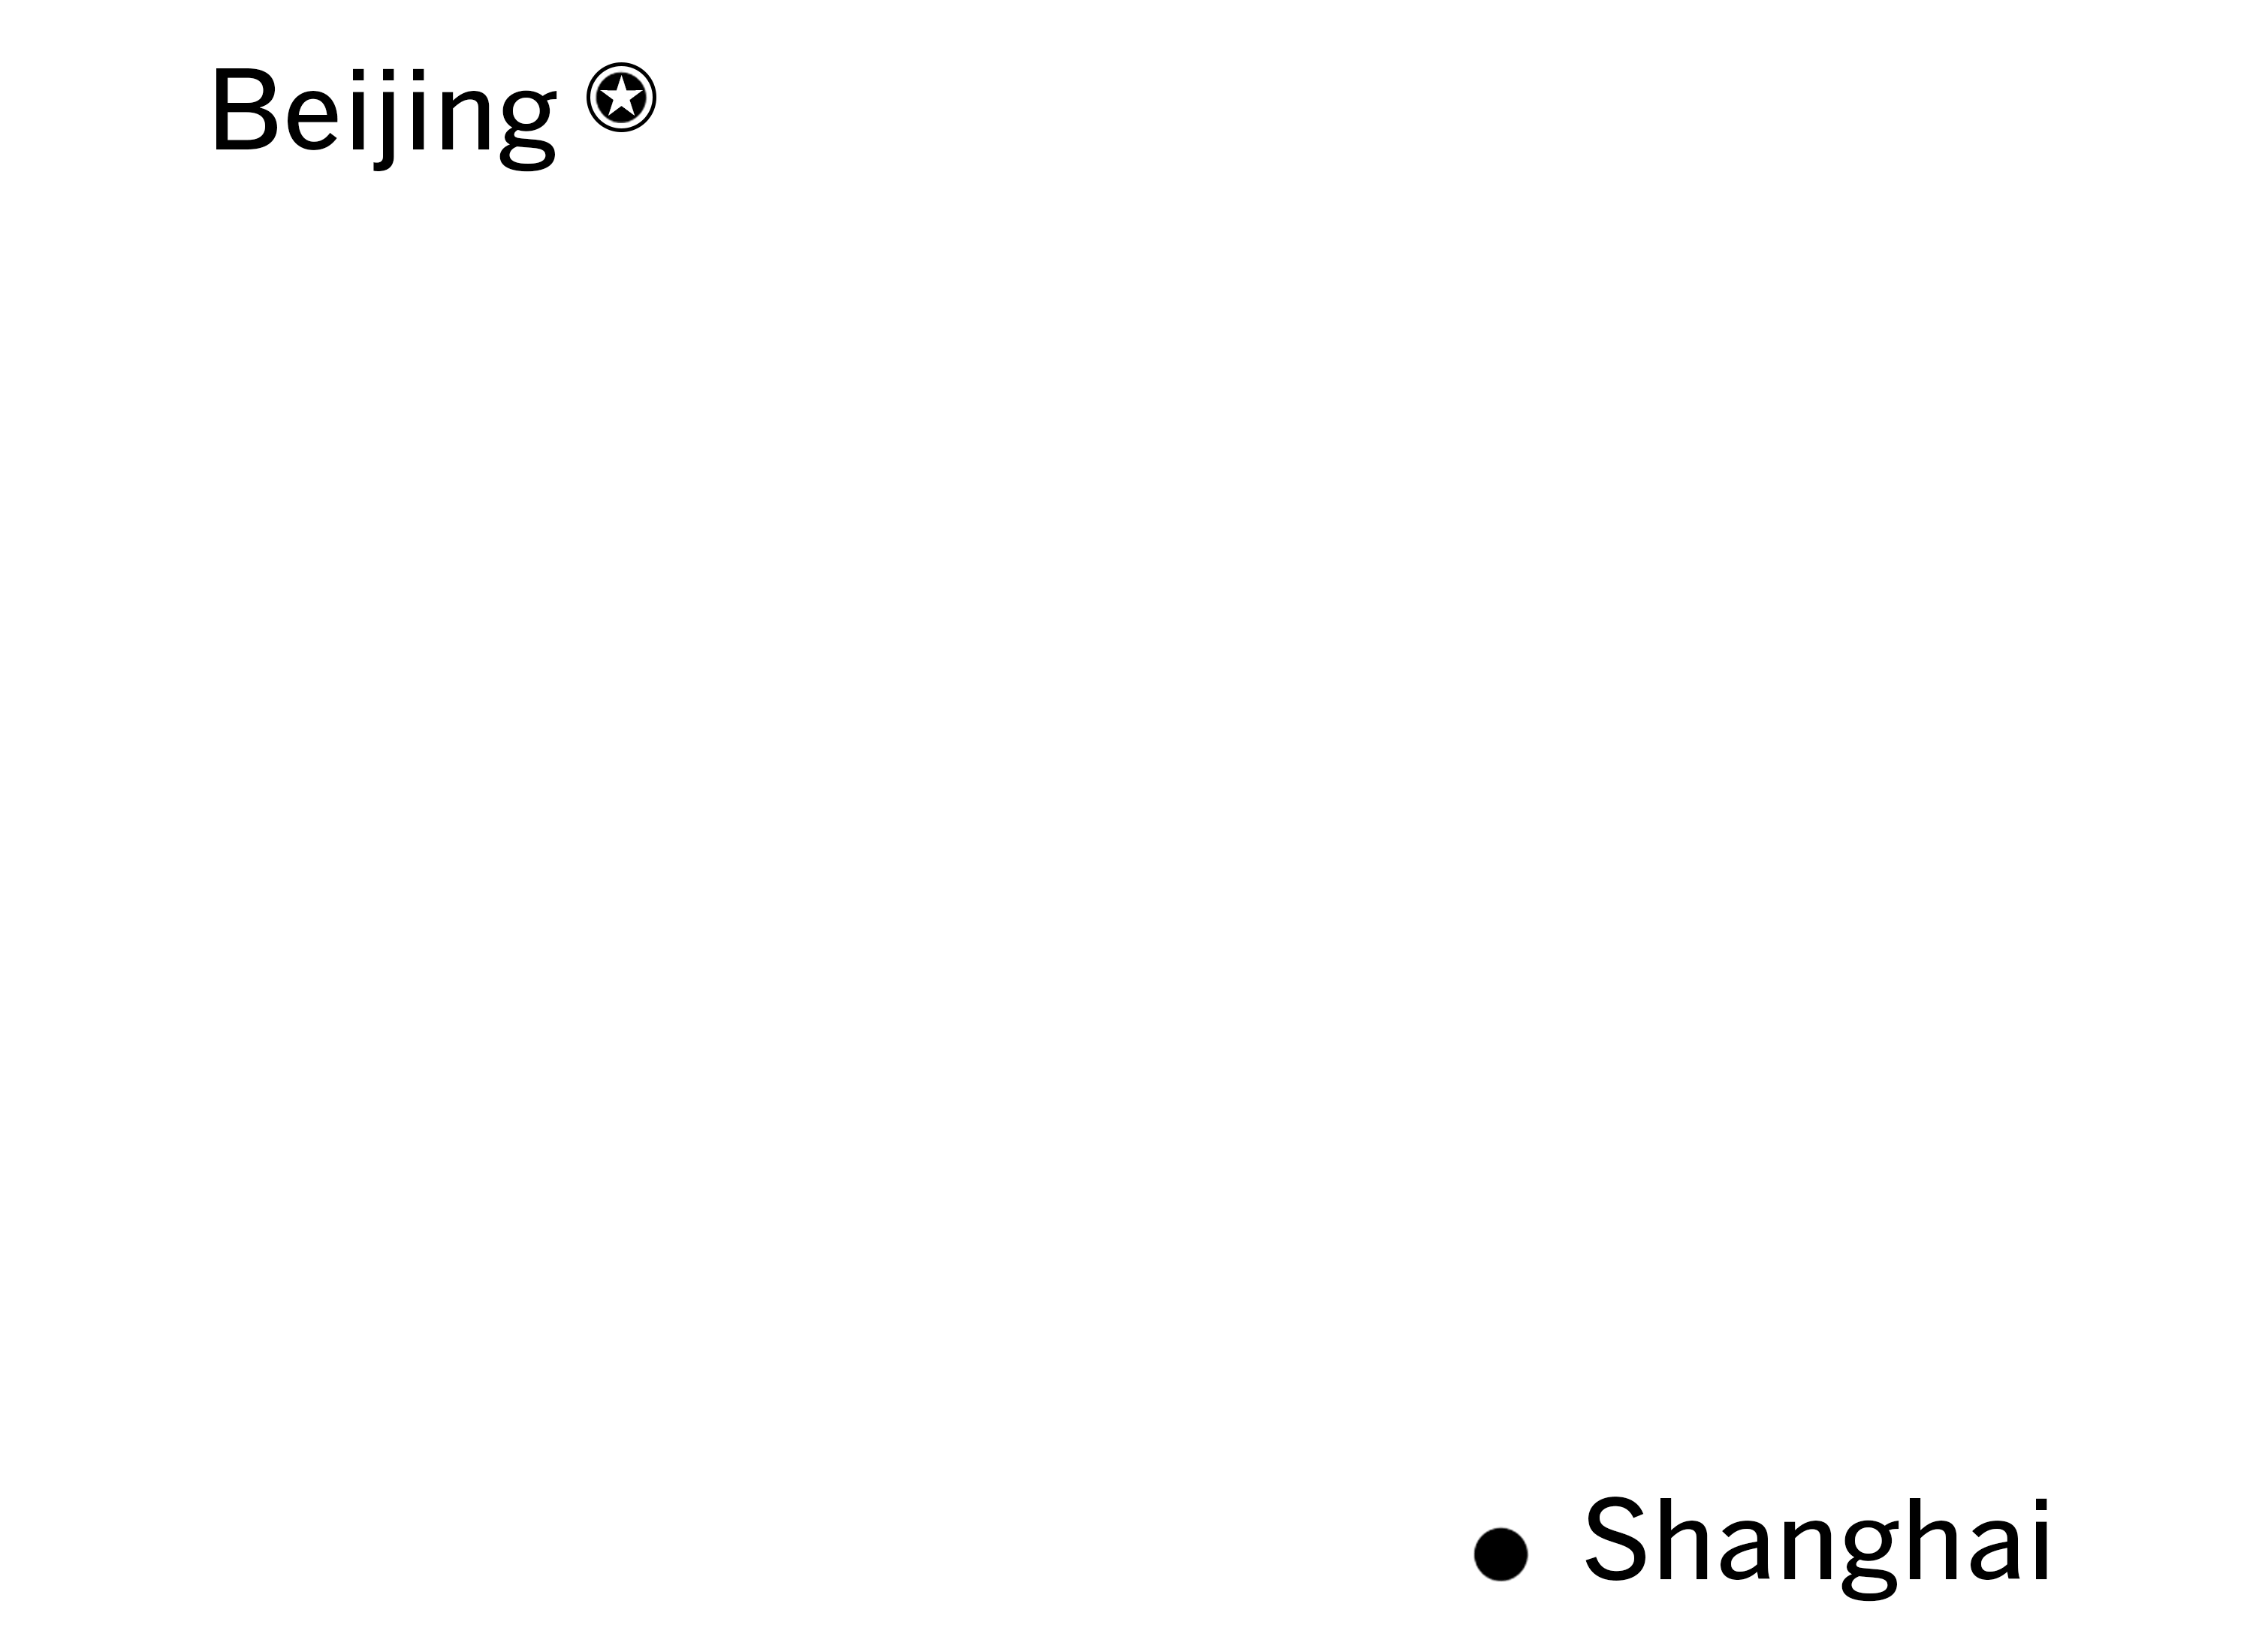 Animated illustration from Shanghai to Beijing